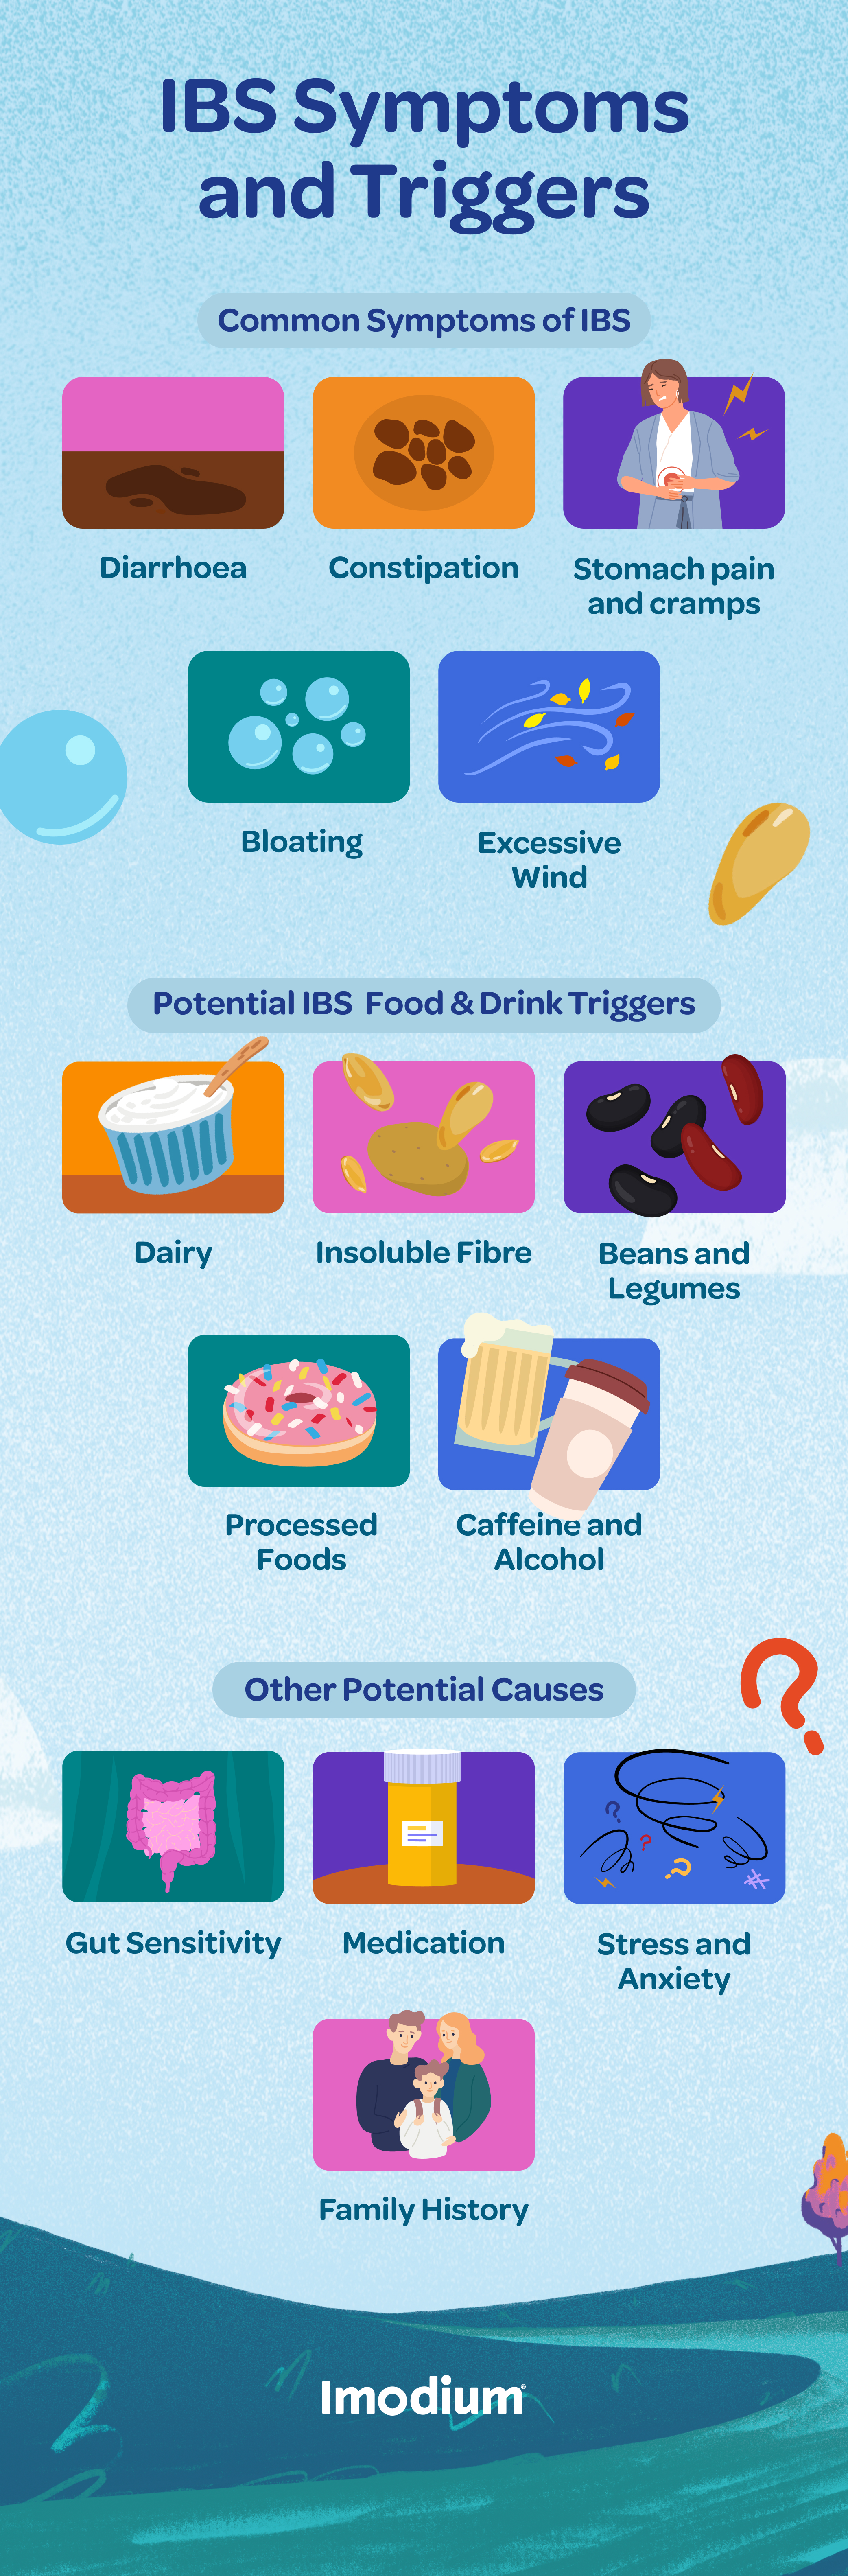 IBS Symptoms and Triggers